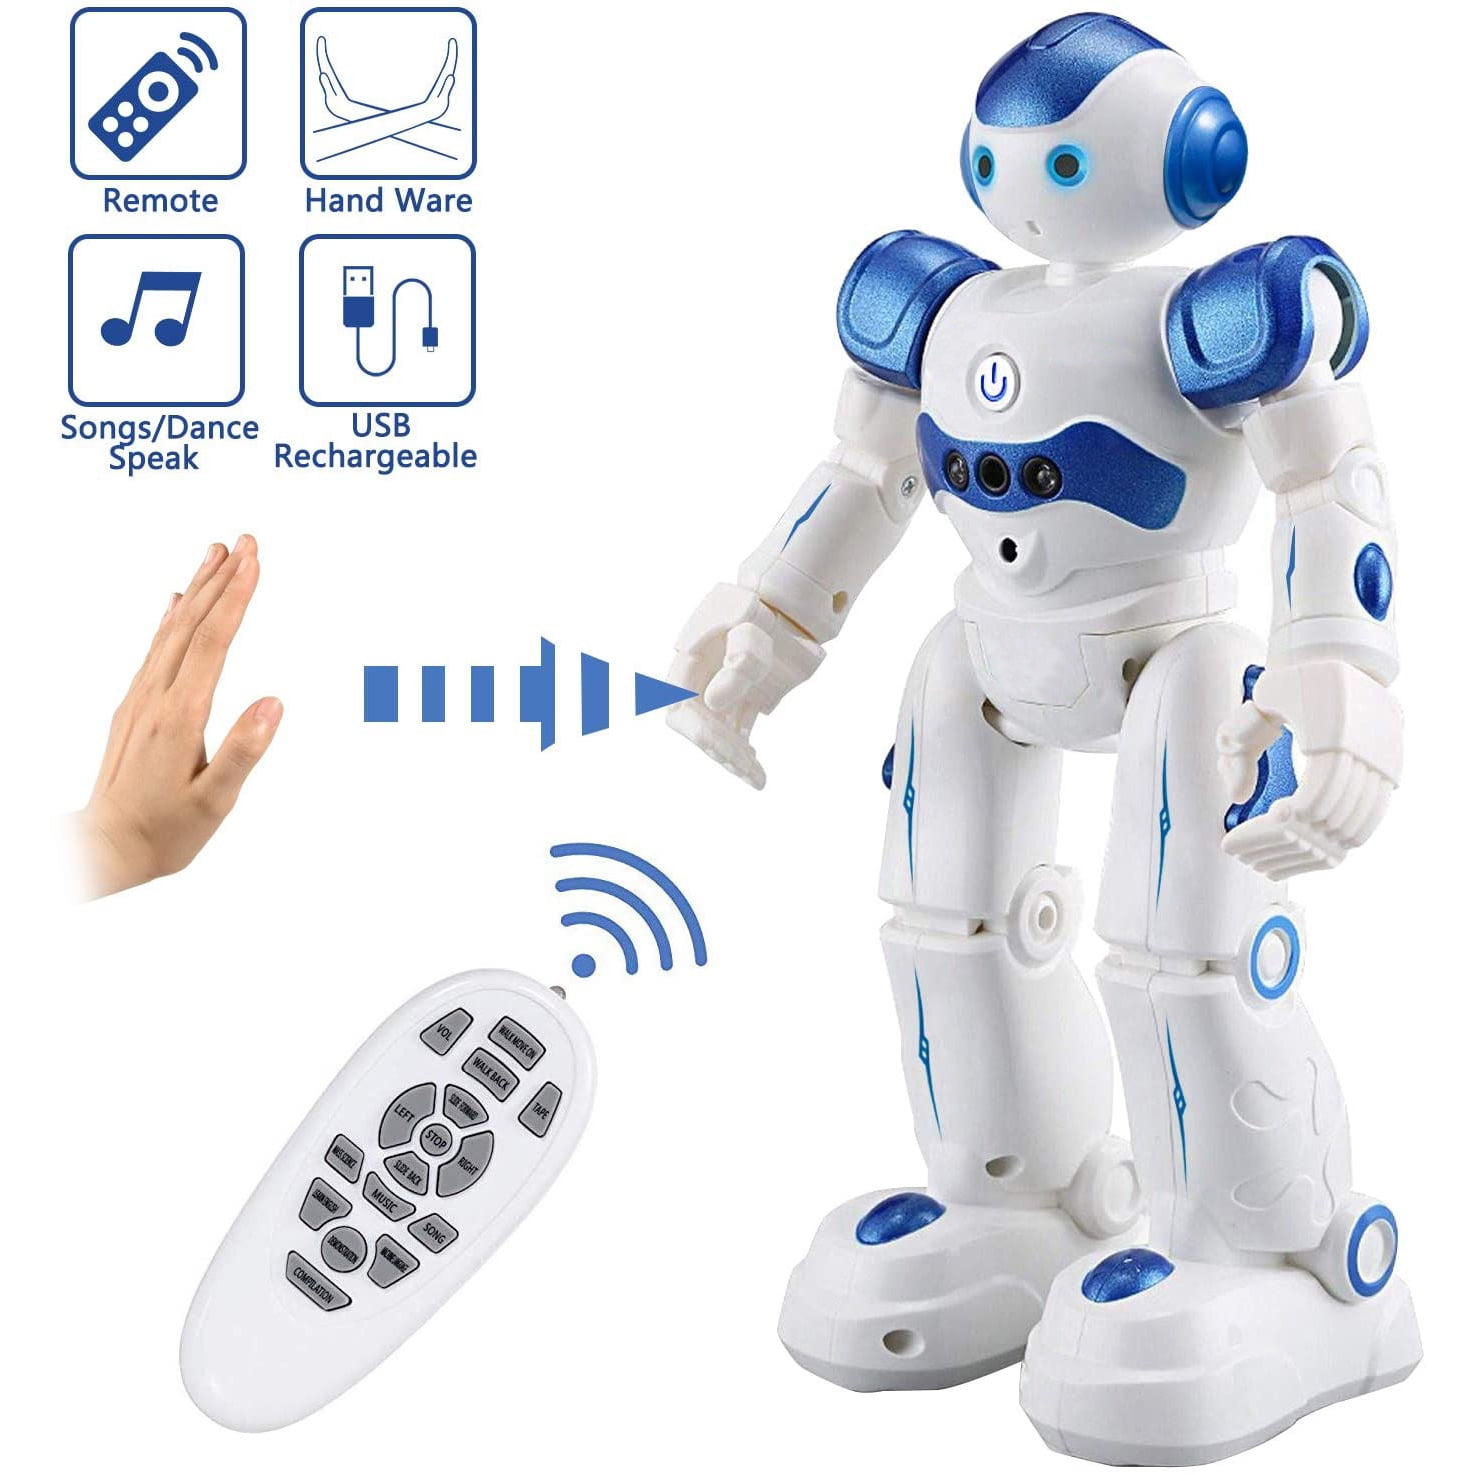 Remote Control Robot Toys for Kids RC Intelligent Programmable Robot Smart 